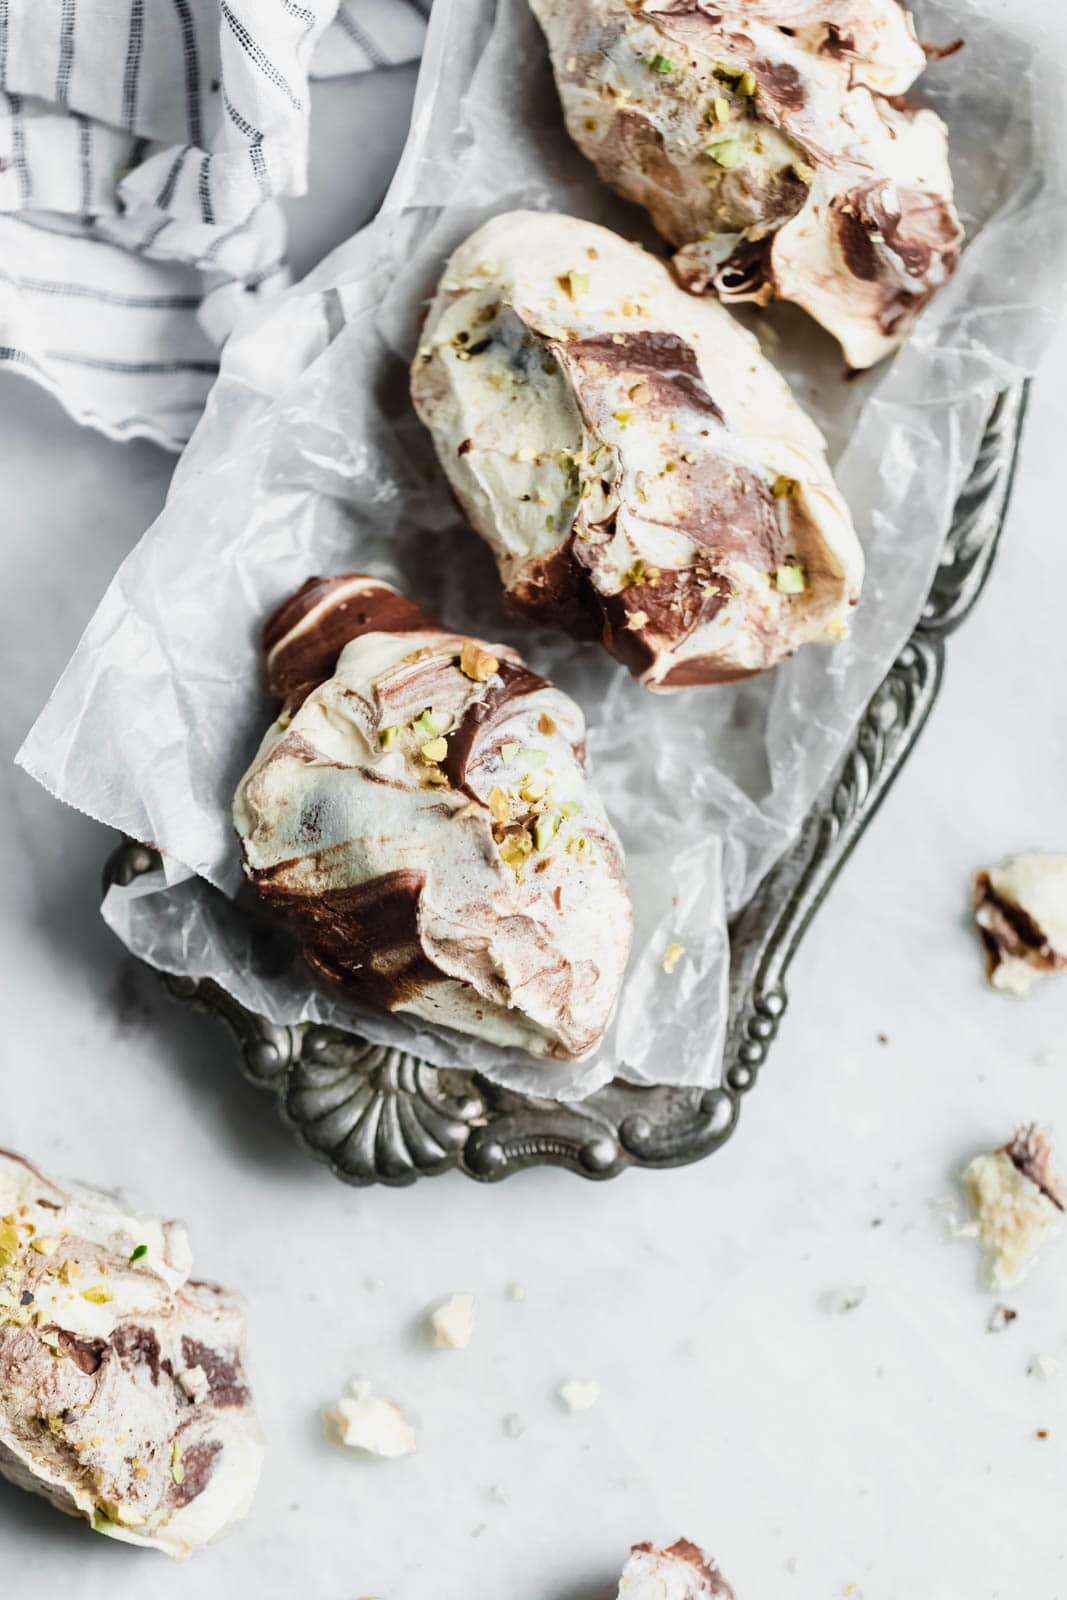 The easiest chocolate swirled spoon meringues that you literally spoon onto a baking sheet. Top 'em with crumbled pistachios, bake, and done!